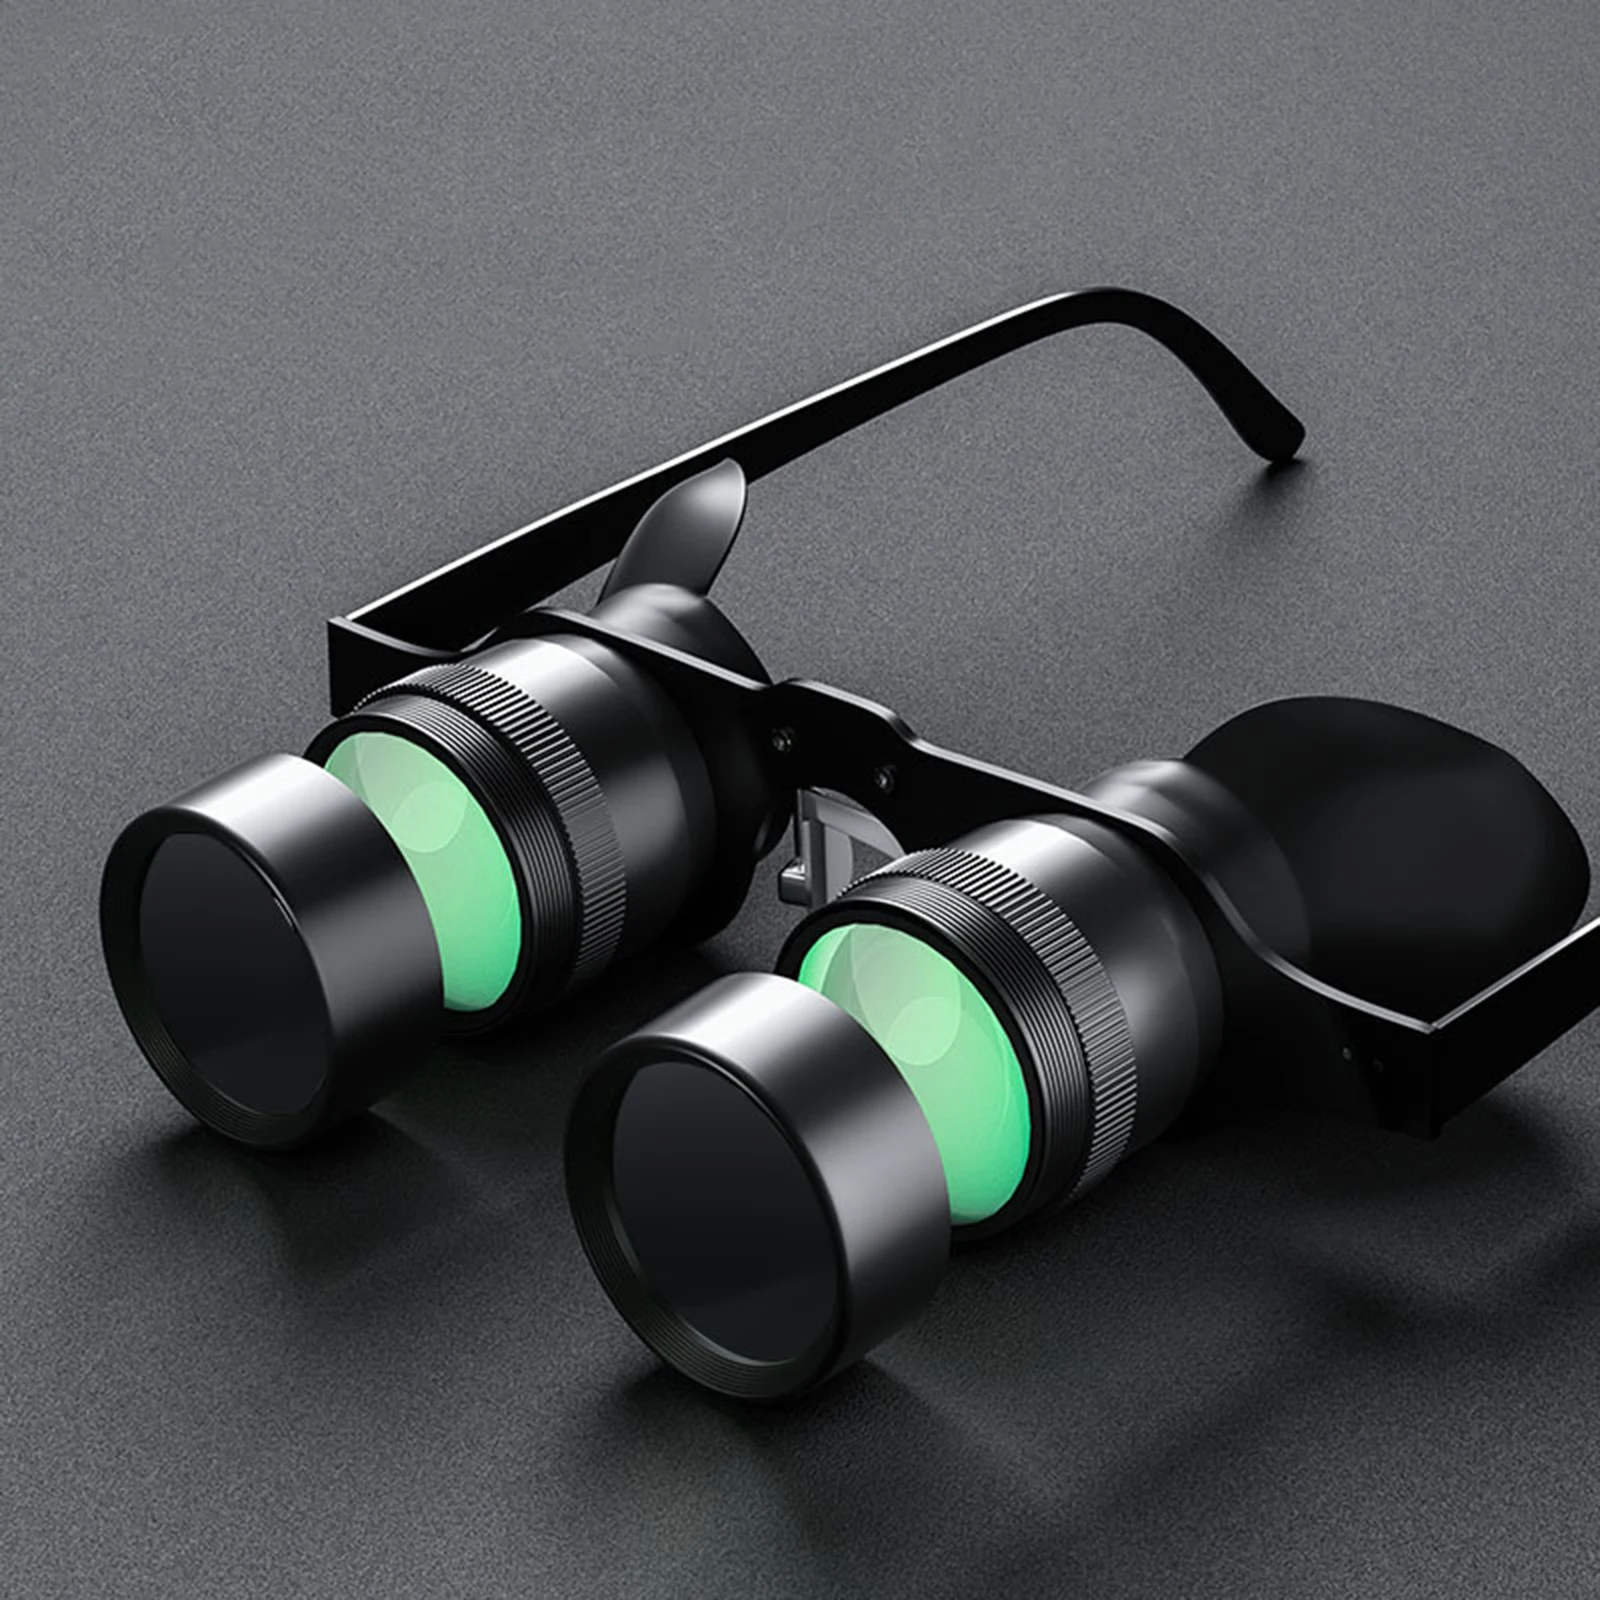 Fishing Telescope Glasses Comfortable to Wear HD Magnifier Glasses Style for Concert Theater Sports Outdoor